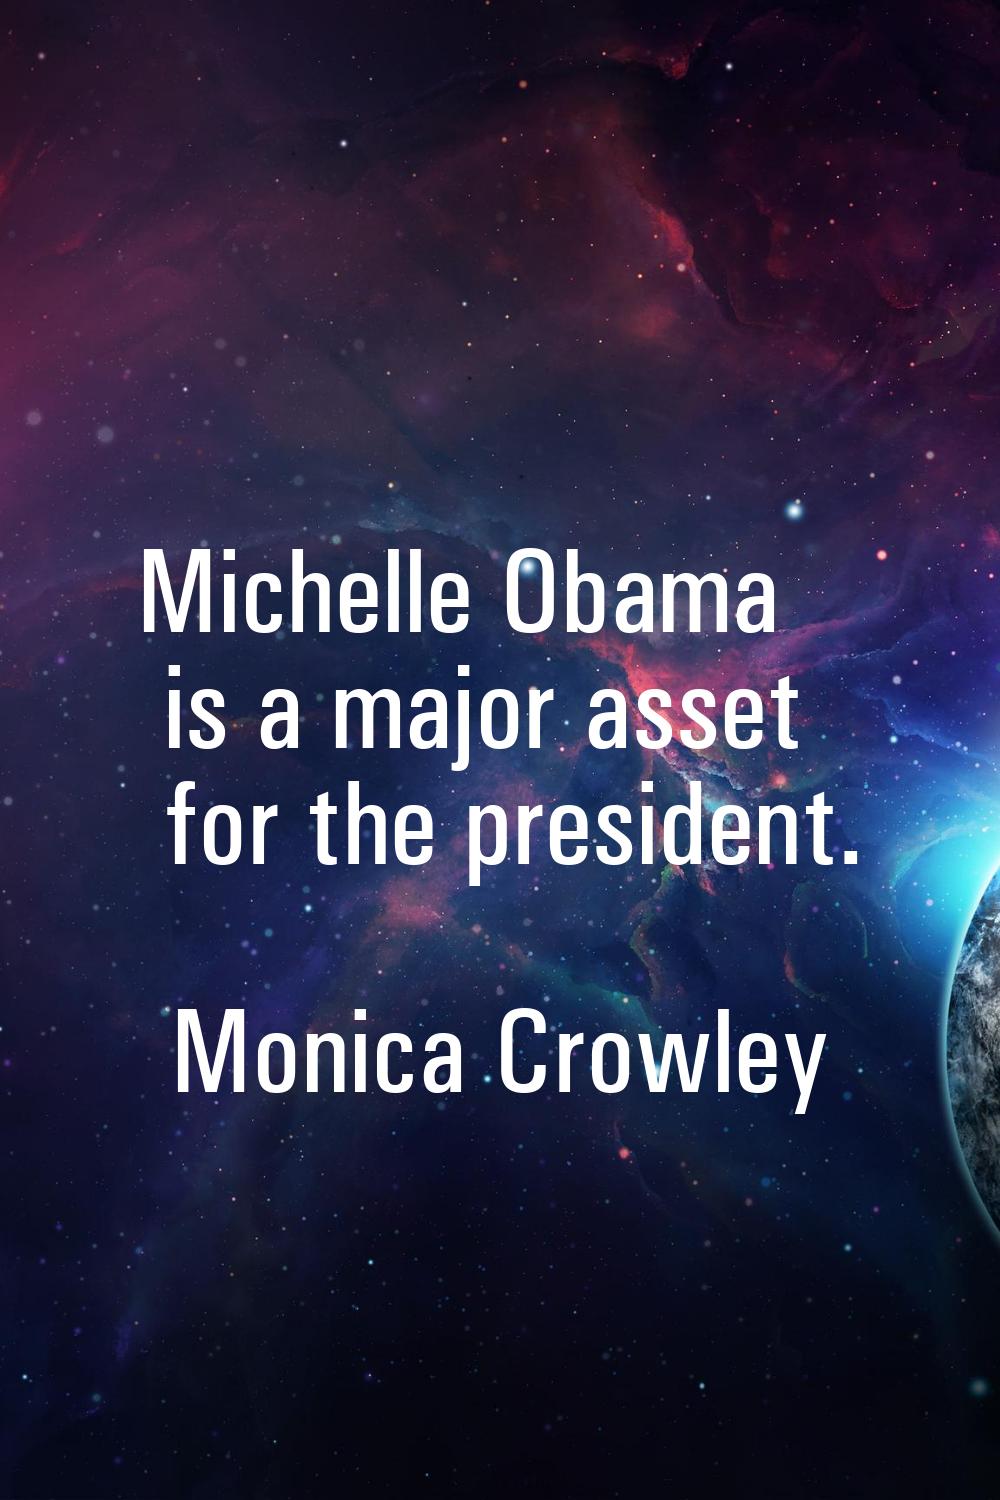 Michelle Obama is a major asset for the president.